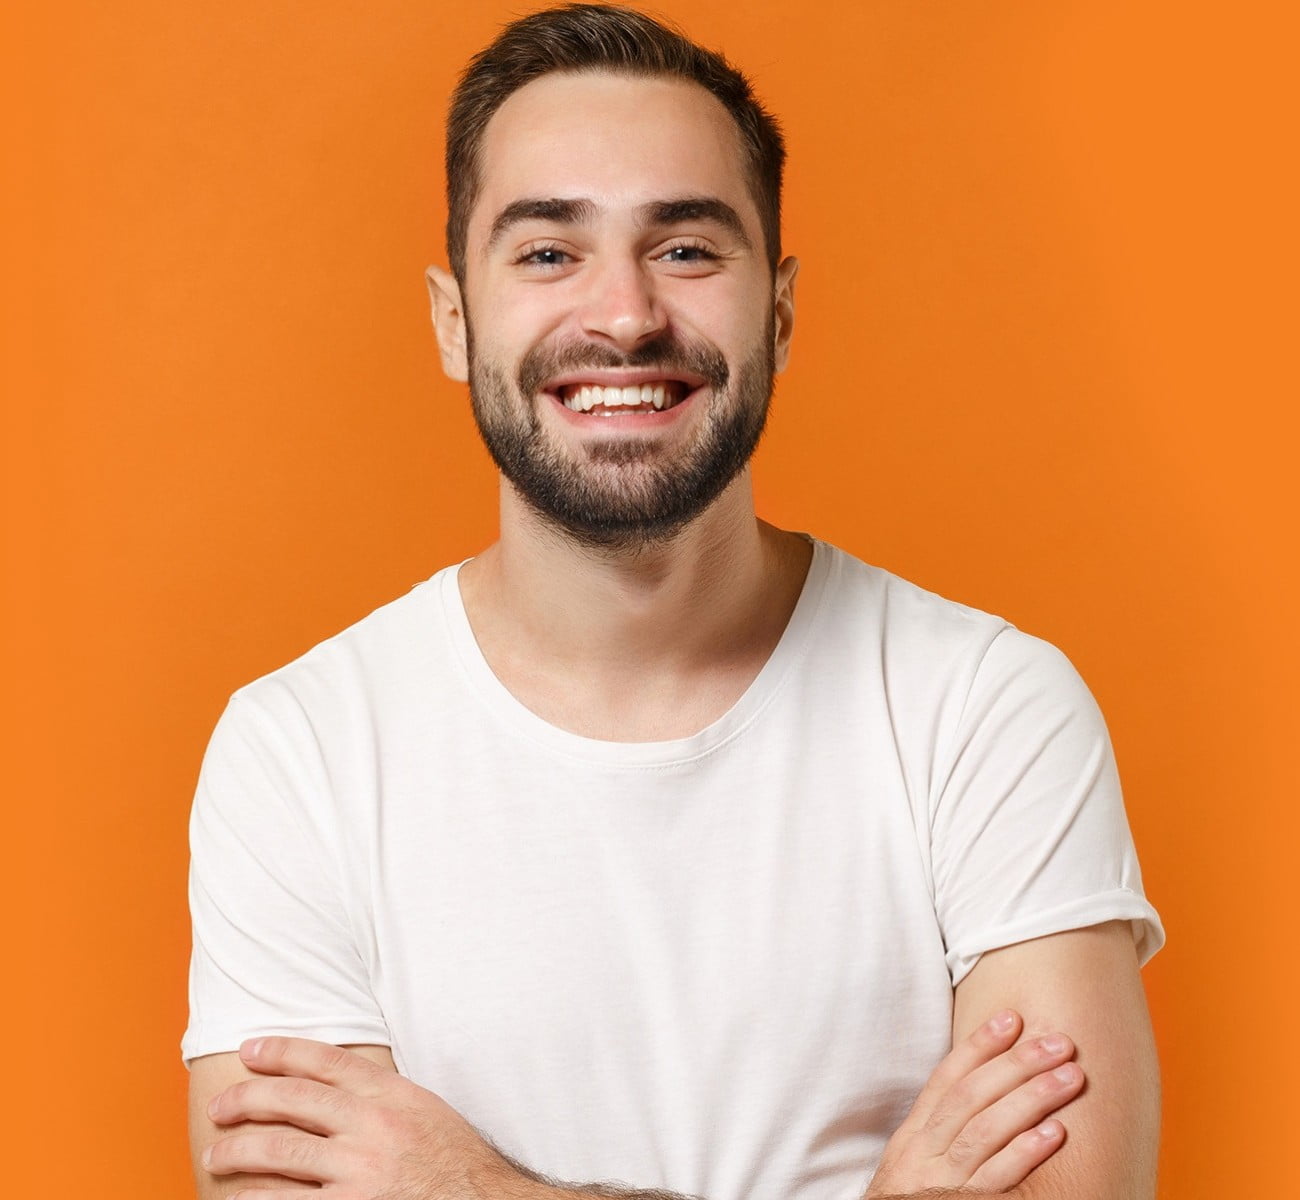 Smiling man with nice teeth and crossed arms on an orange background, happy with his HCi waiting periods